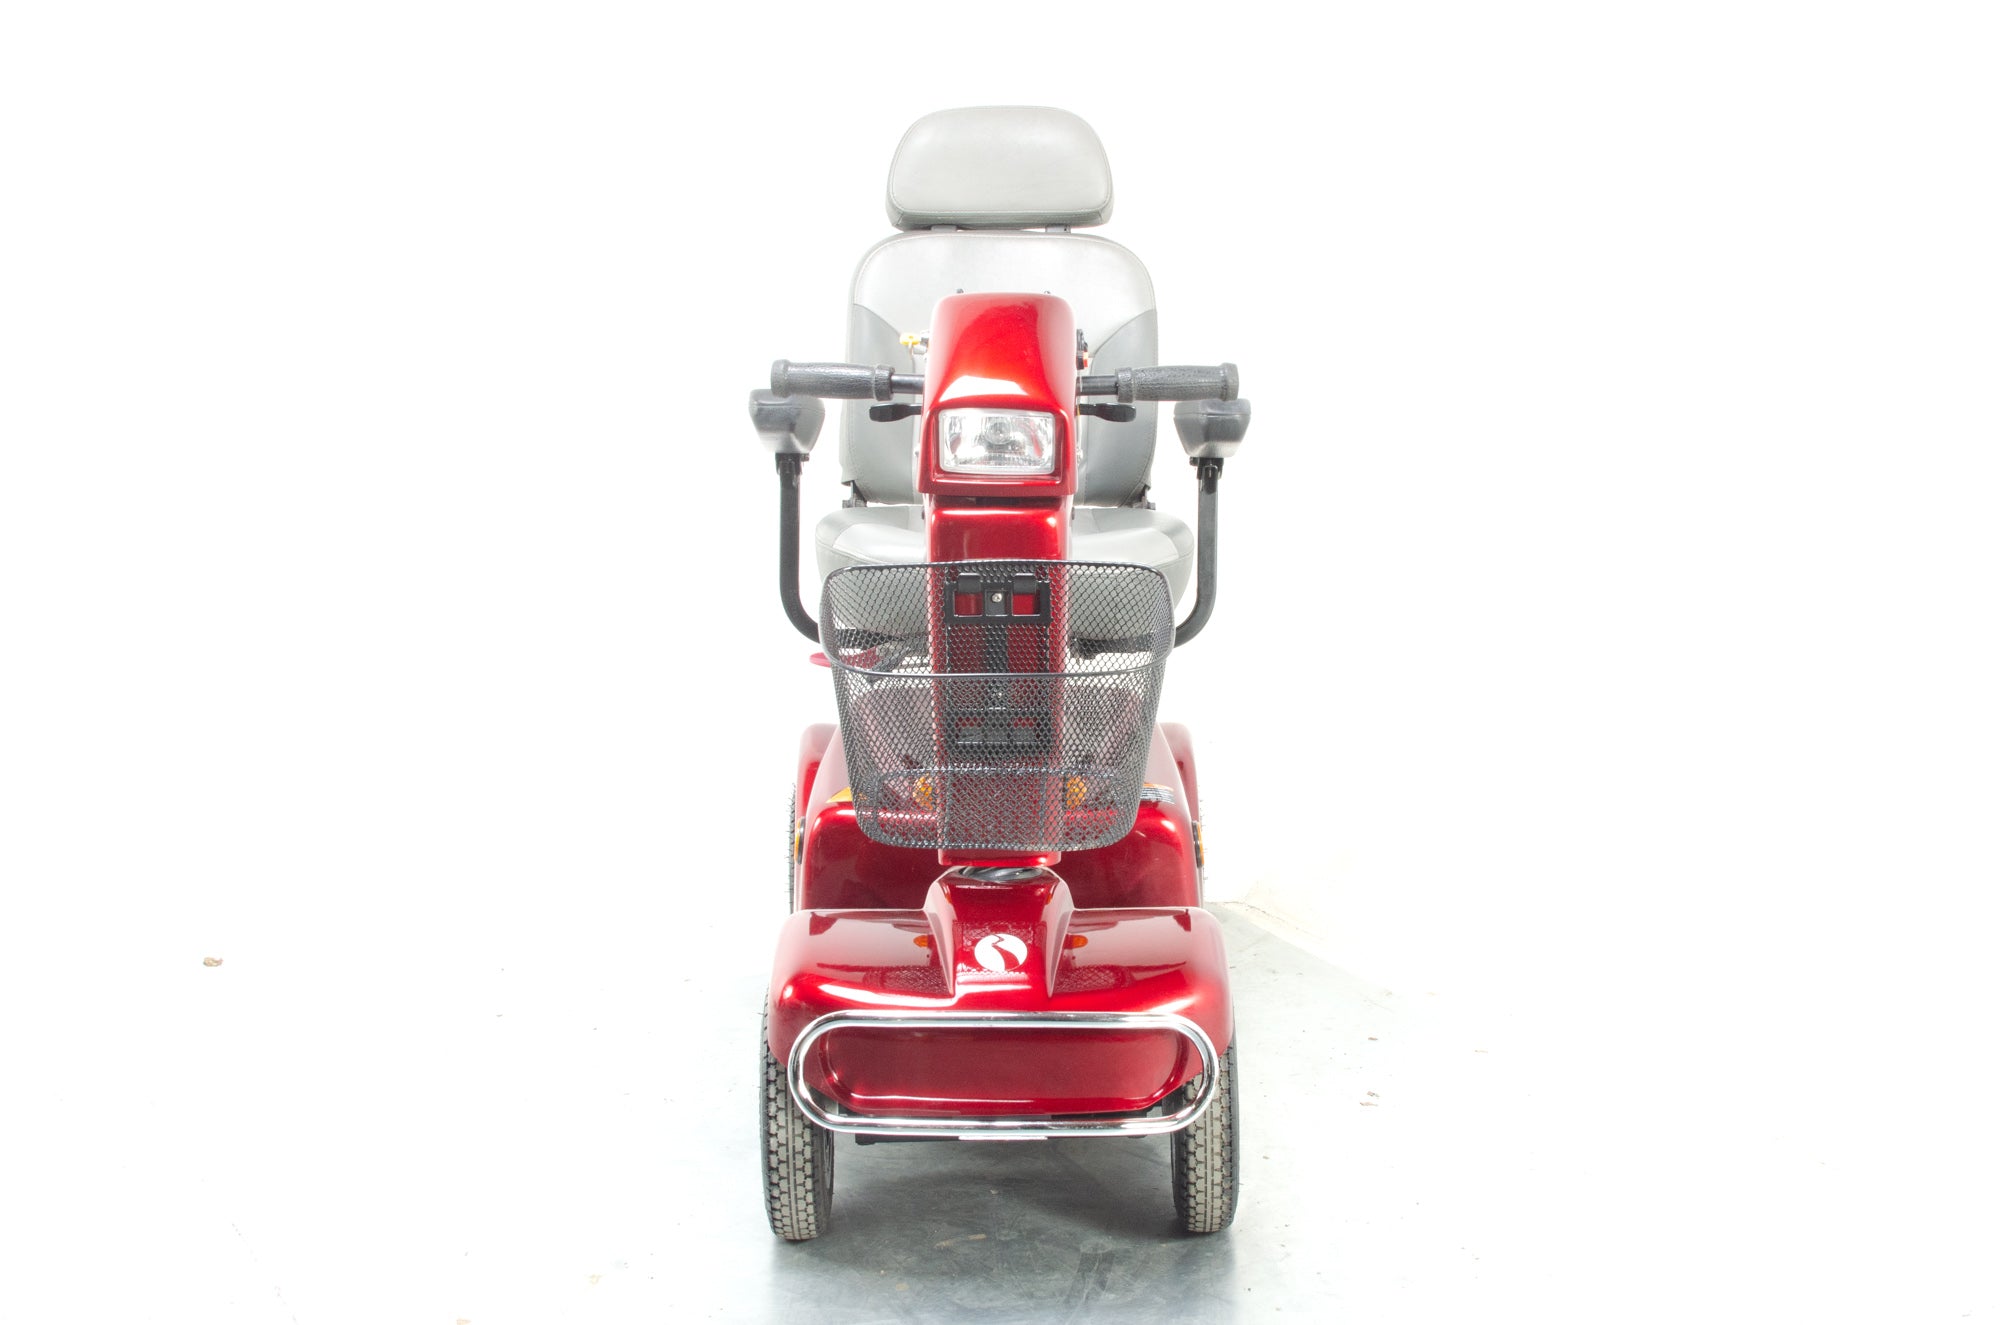 Rascal 388XL Used Electric Mobility Scooter 6mph Road Pavement Midsize Pneumatic